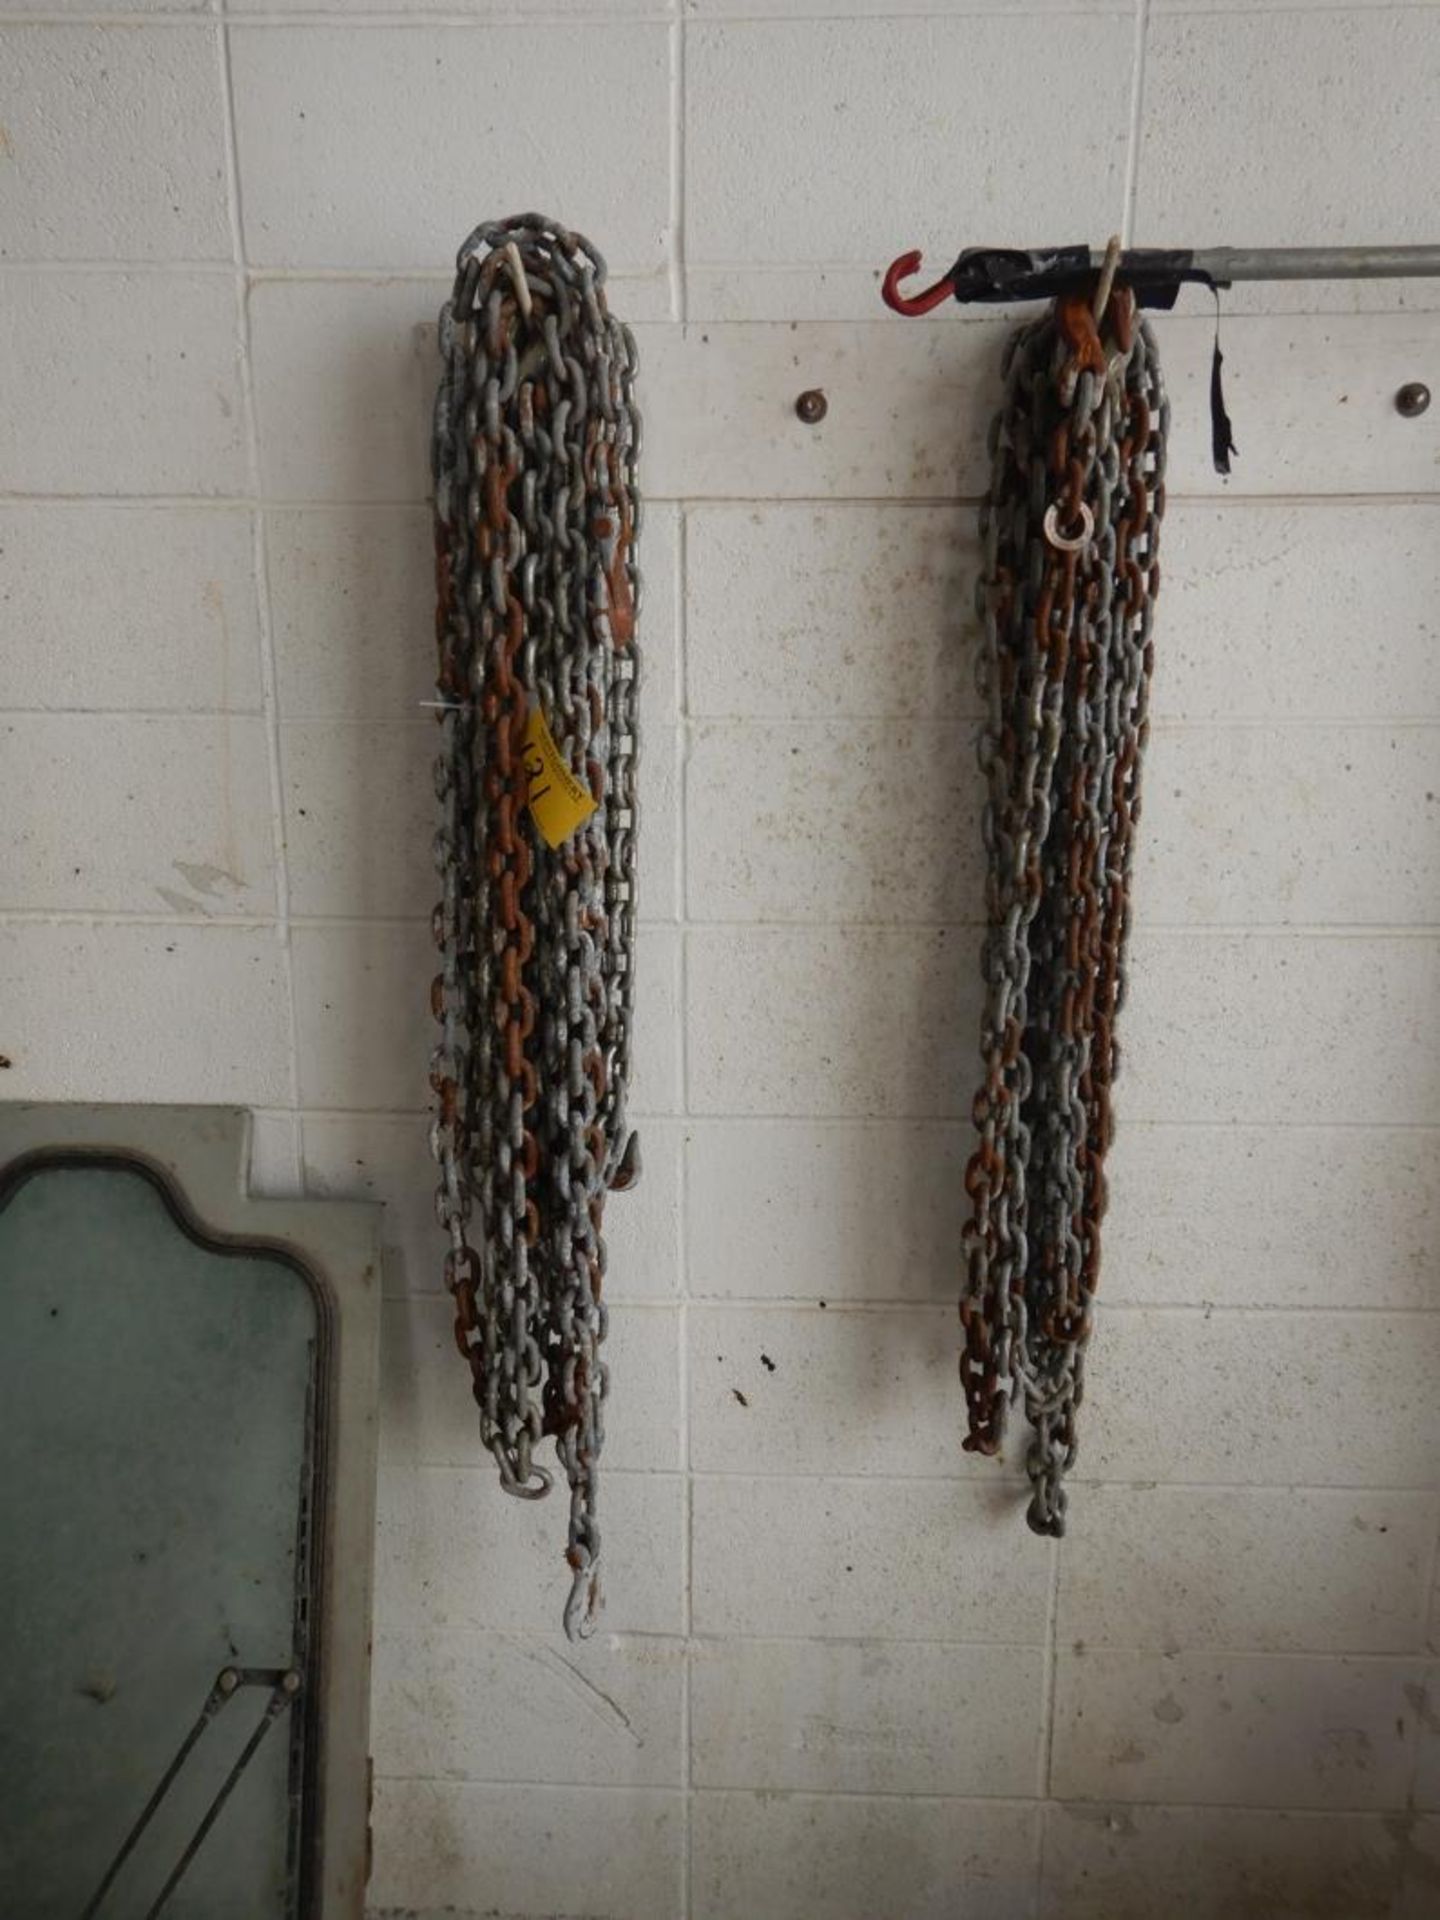 L/O OF GRADE DECKING CHAIN, BOOMERS, CABLE COME- A-LONG ETC